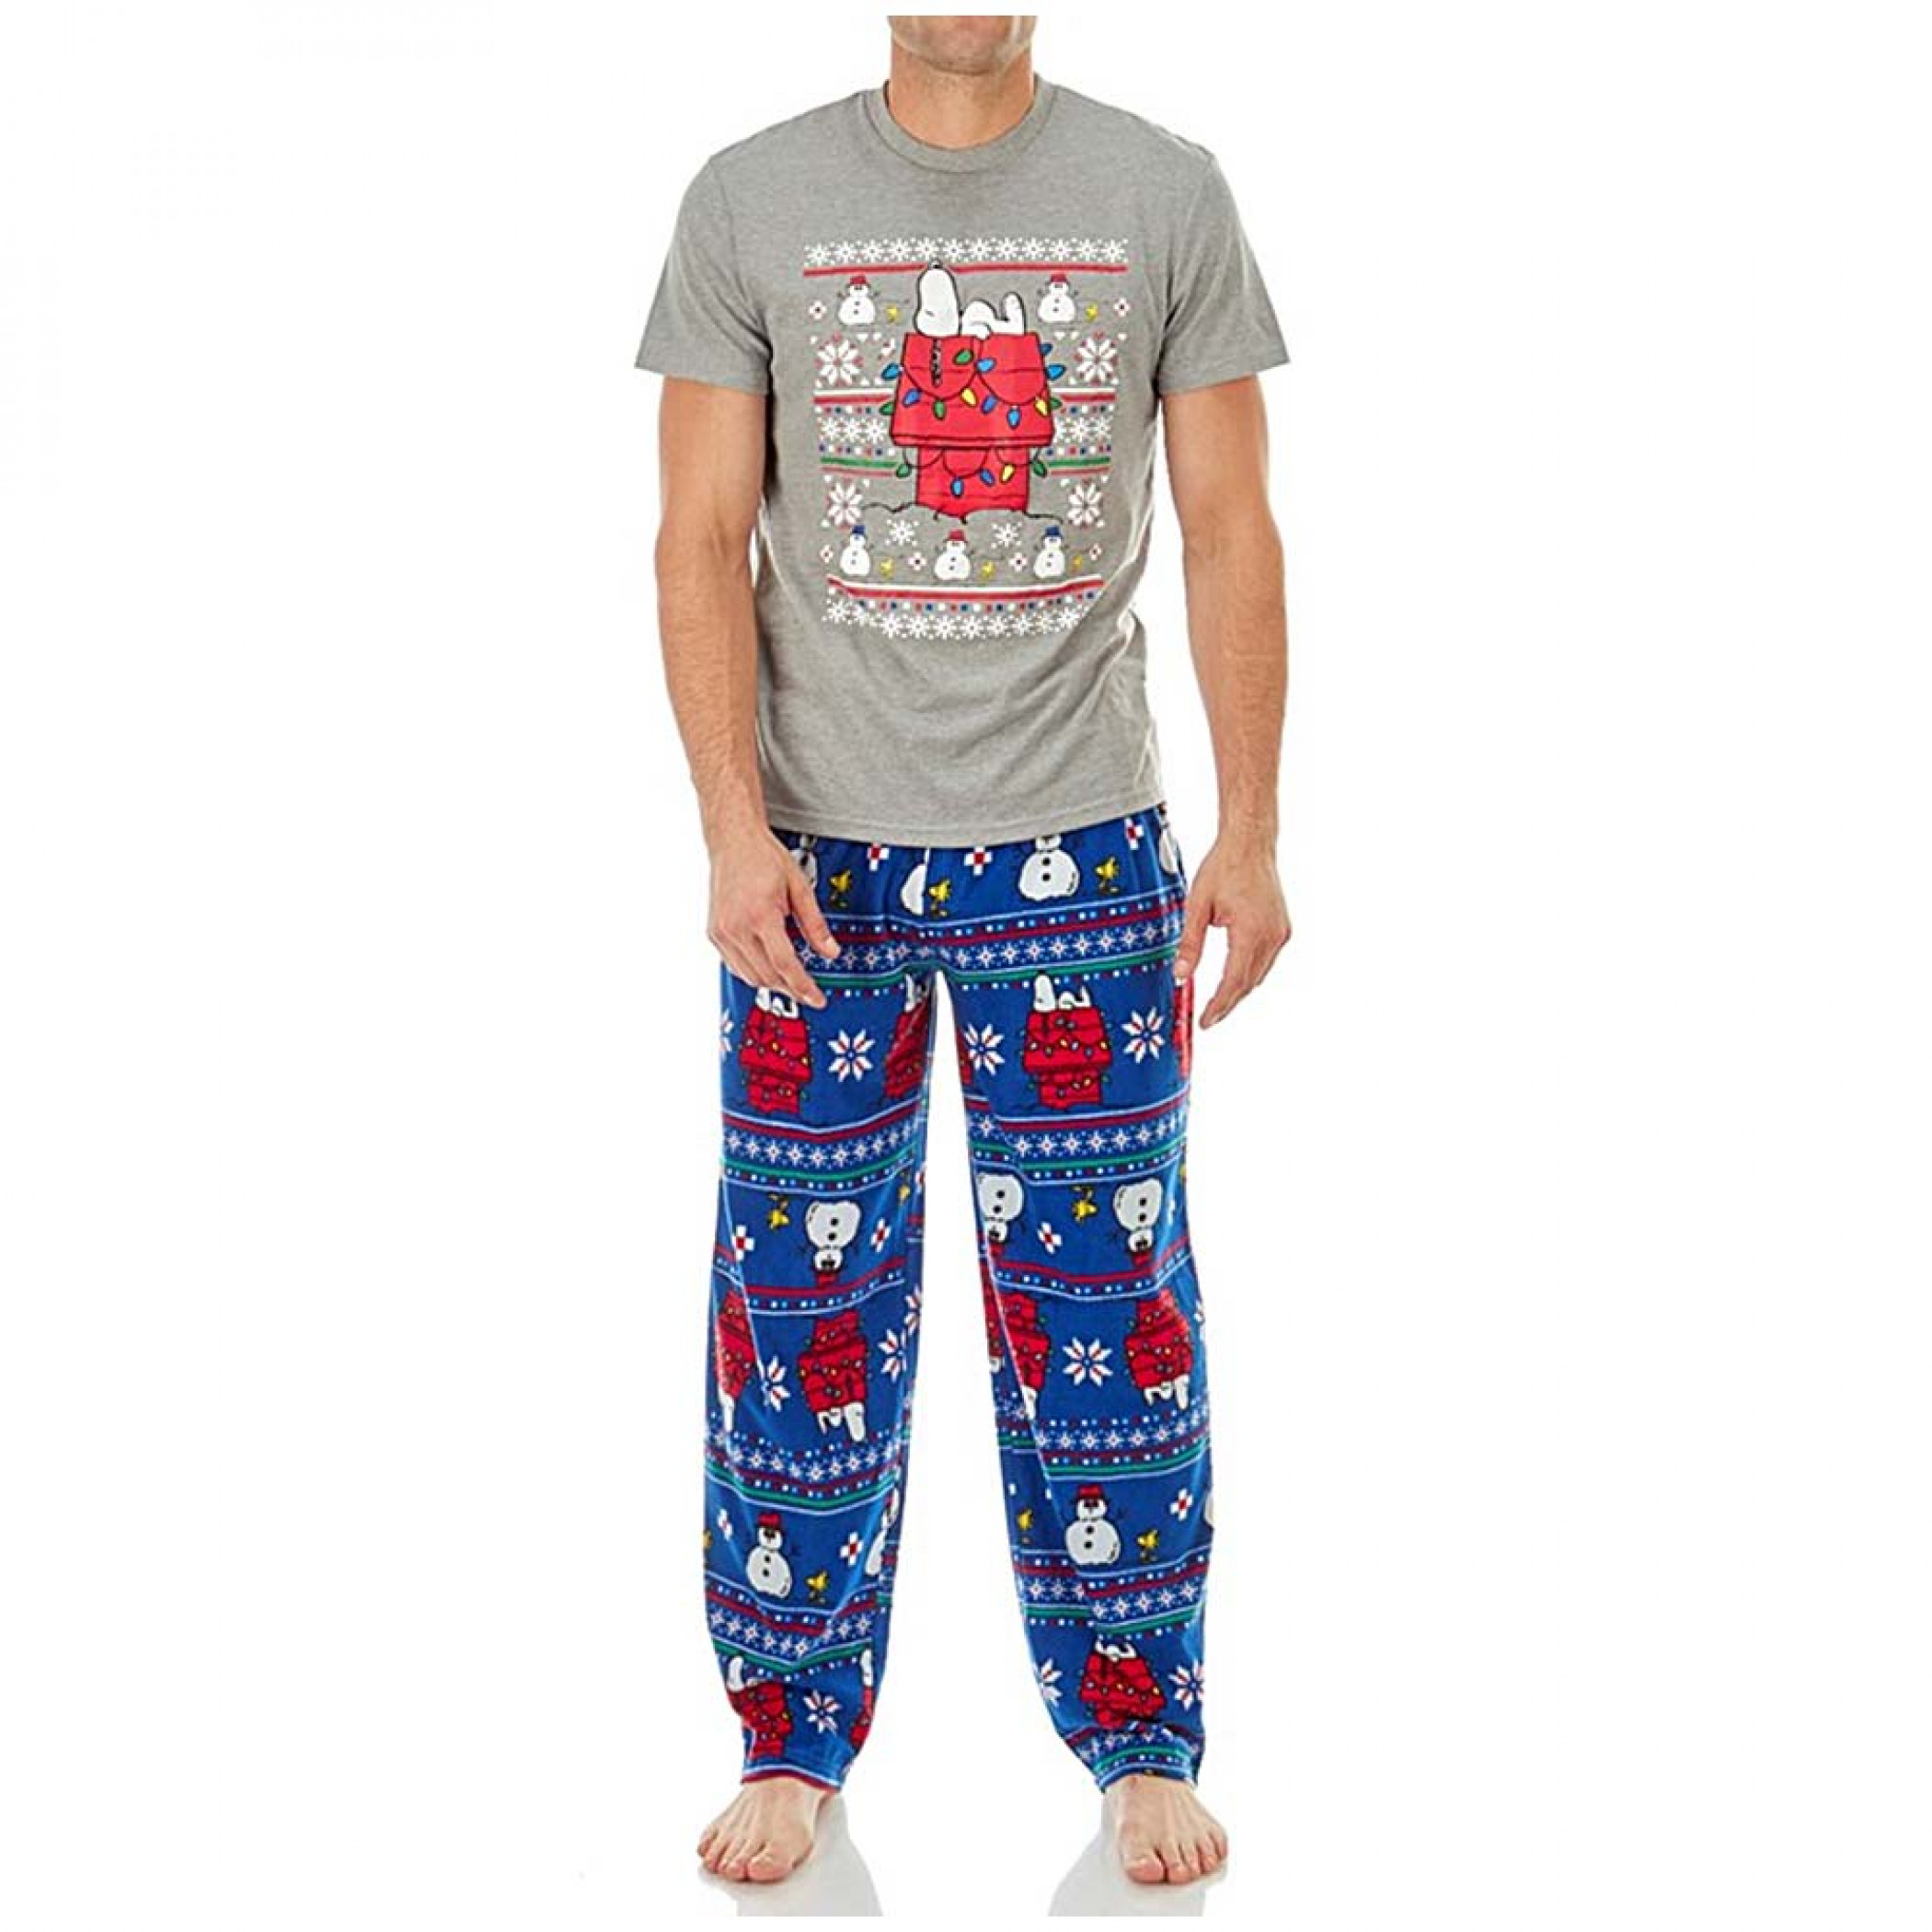 Snoopy Grey And Blue Tee Shirt And Lounge Pant Set